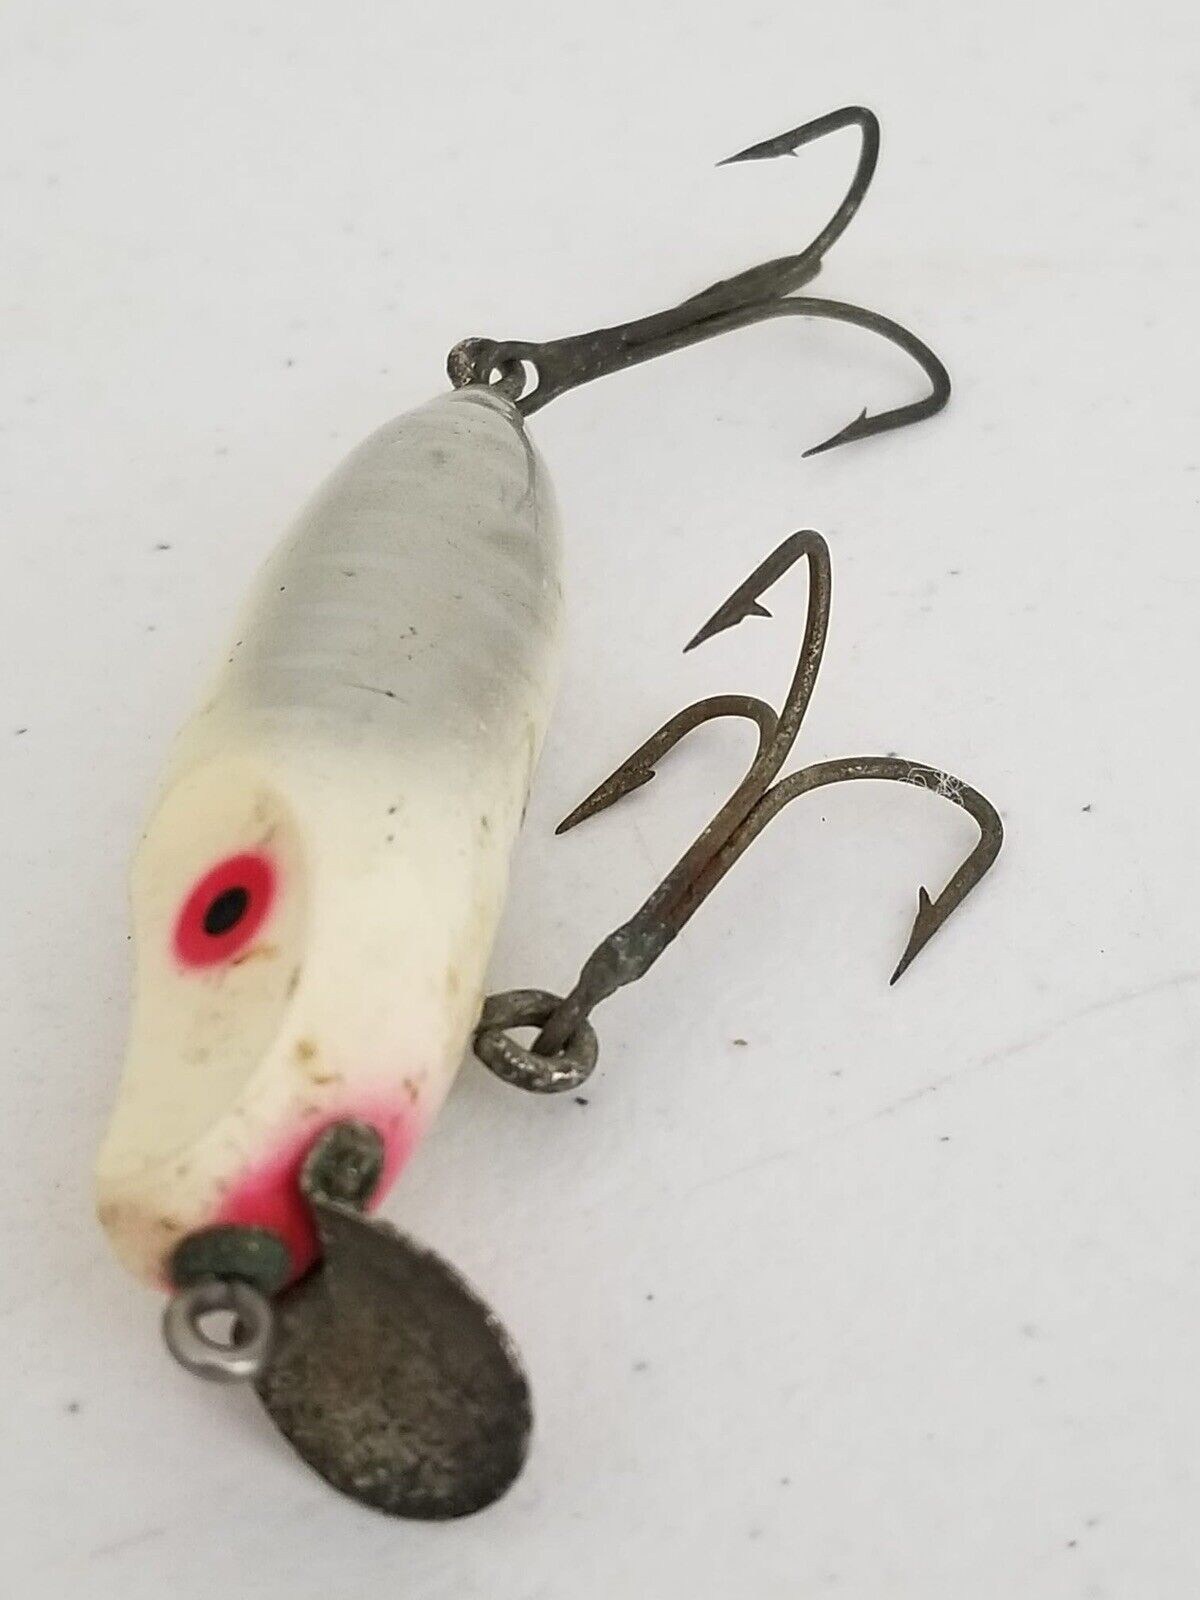 Rare Vintage Red & White Floating Fishing Lure with Dual Treble Hooks - Collectible Angler's Delight - TreasuTiques